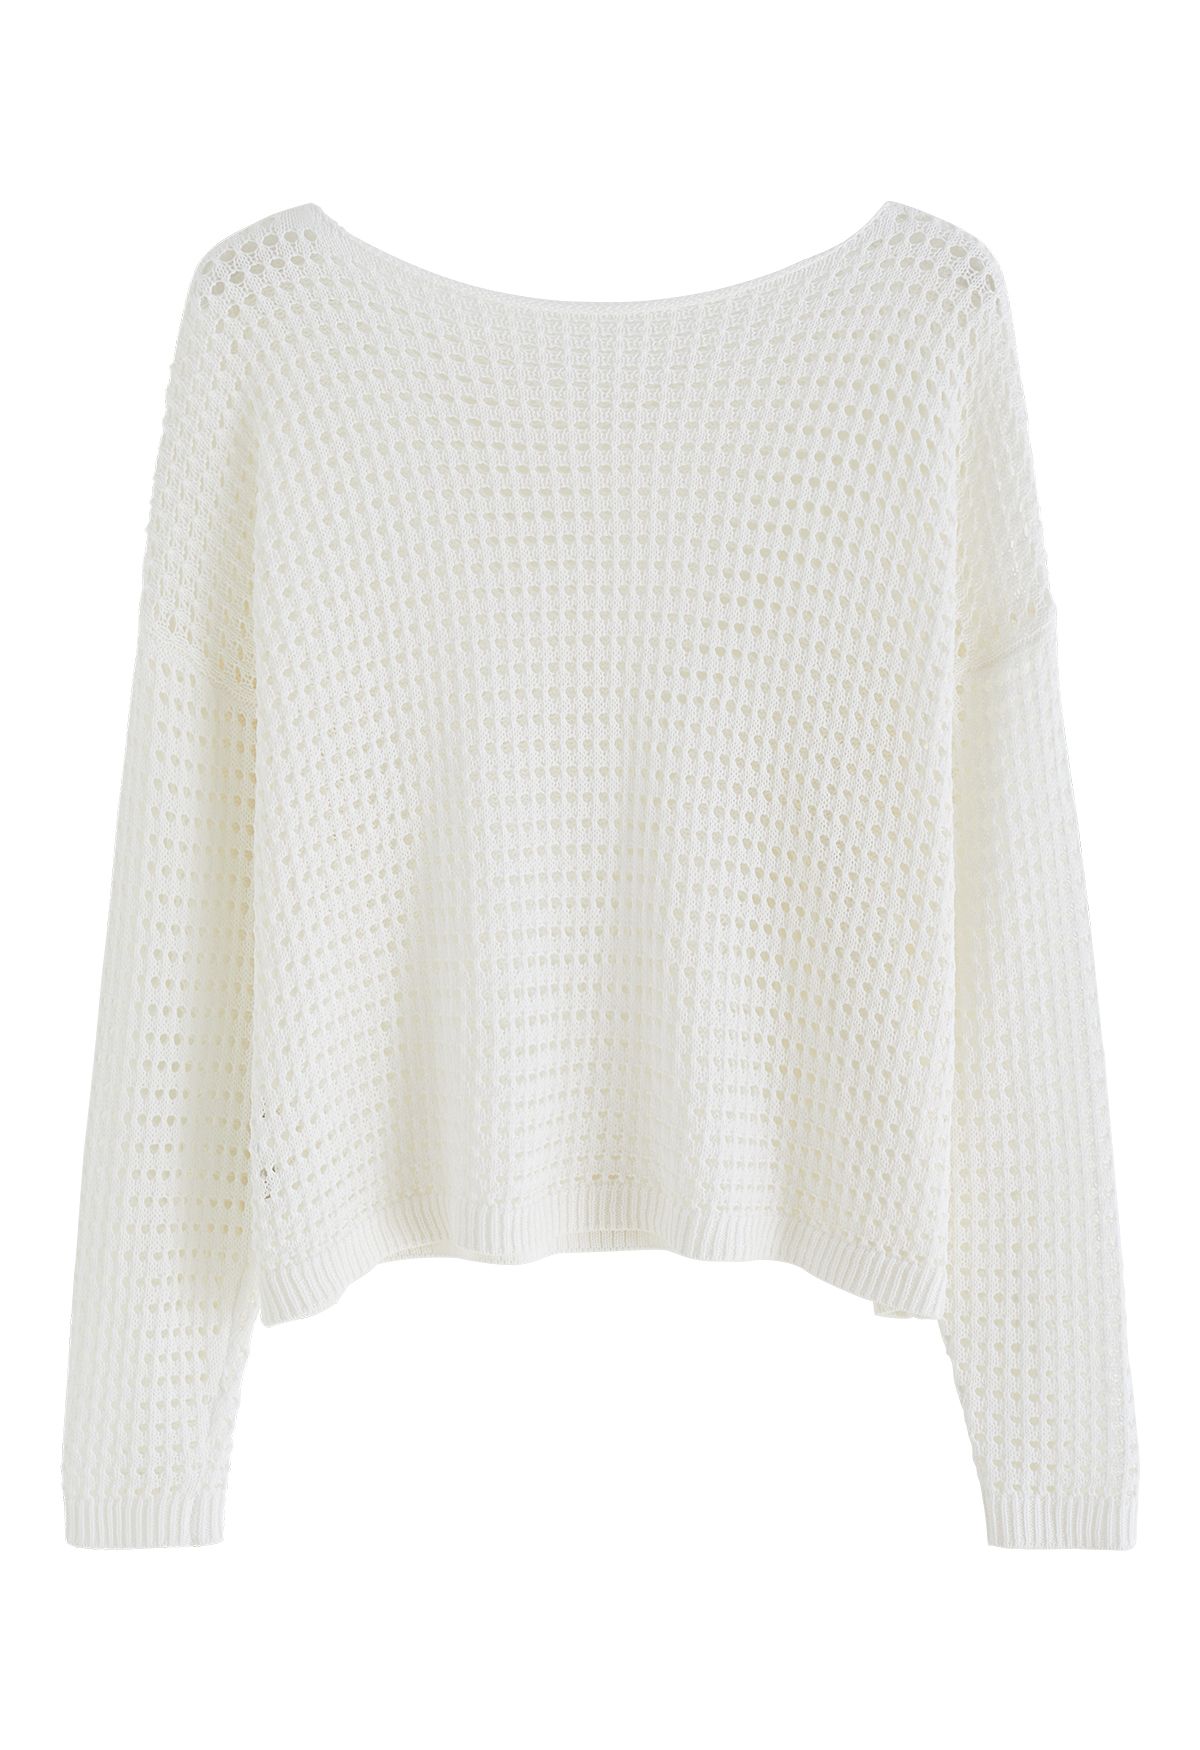 Hollow Out Boat Neck Smock Top in White